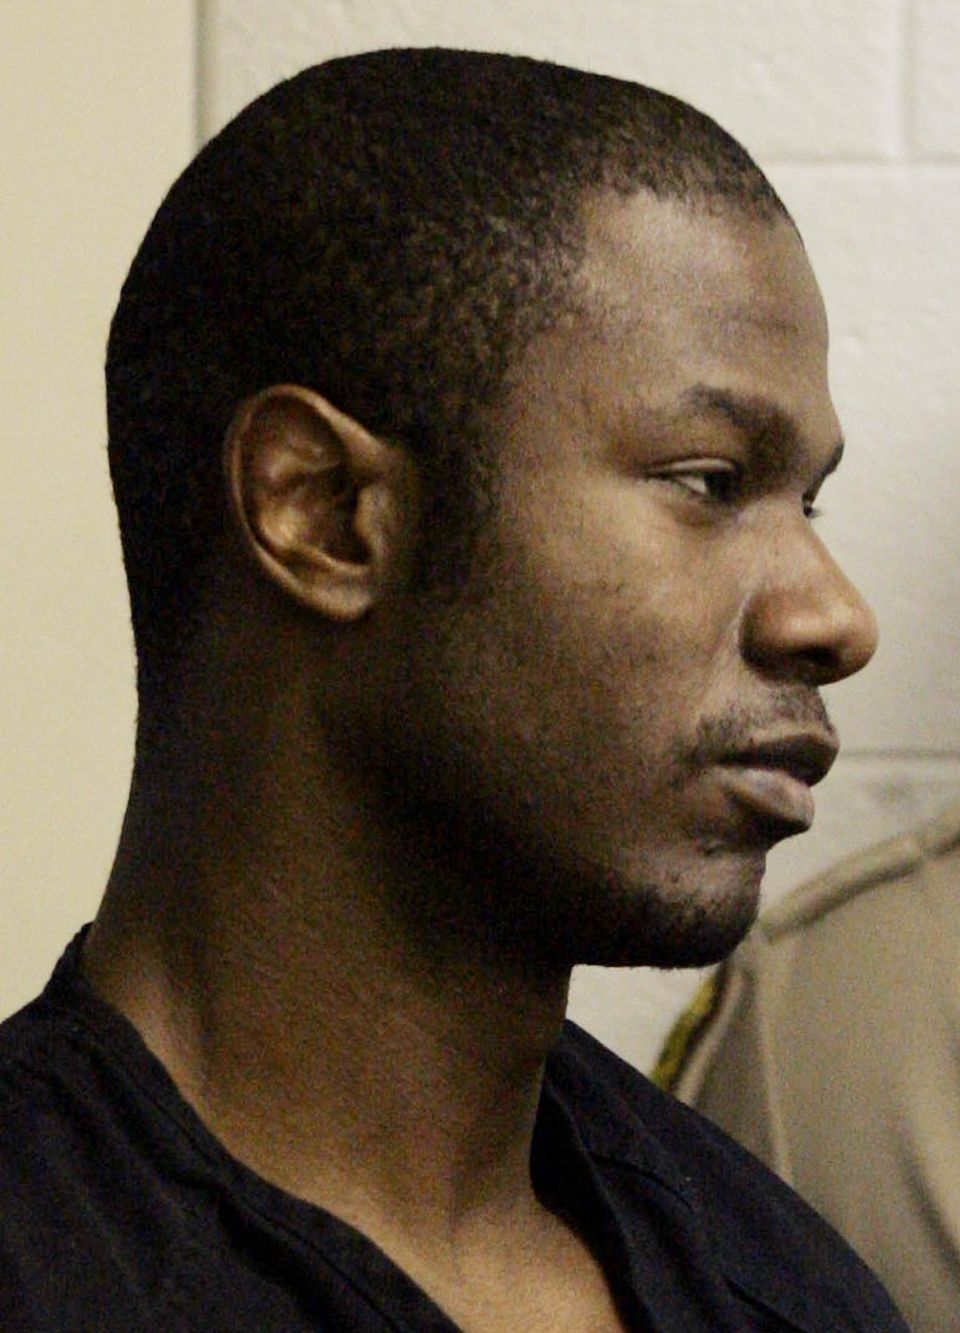 A Killer S Mother Recounts The Final Moments That Made Him Snap Huffpost